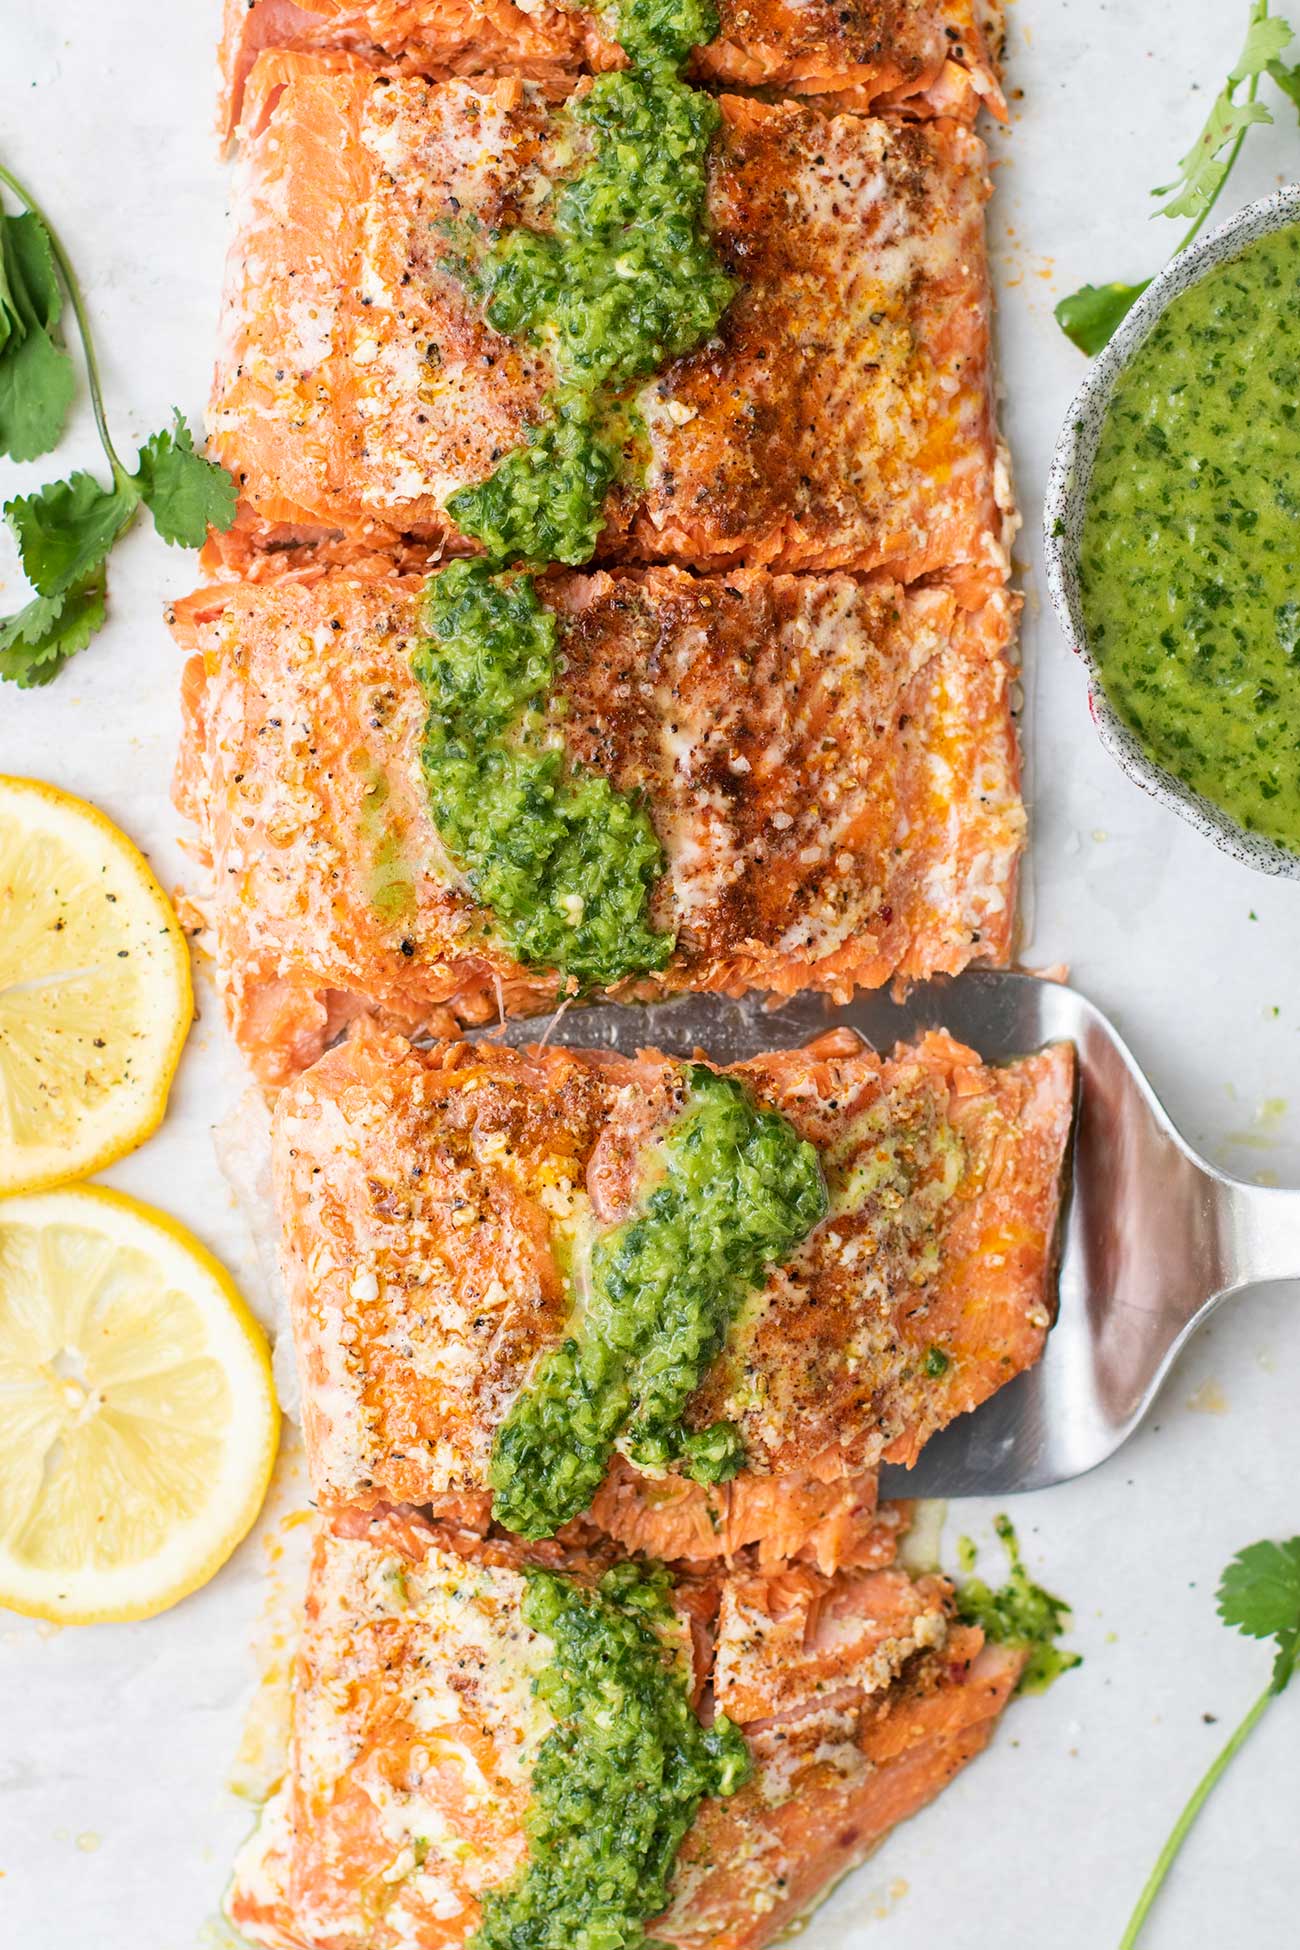 Salmon shown drizzled with mojo verde.